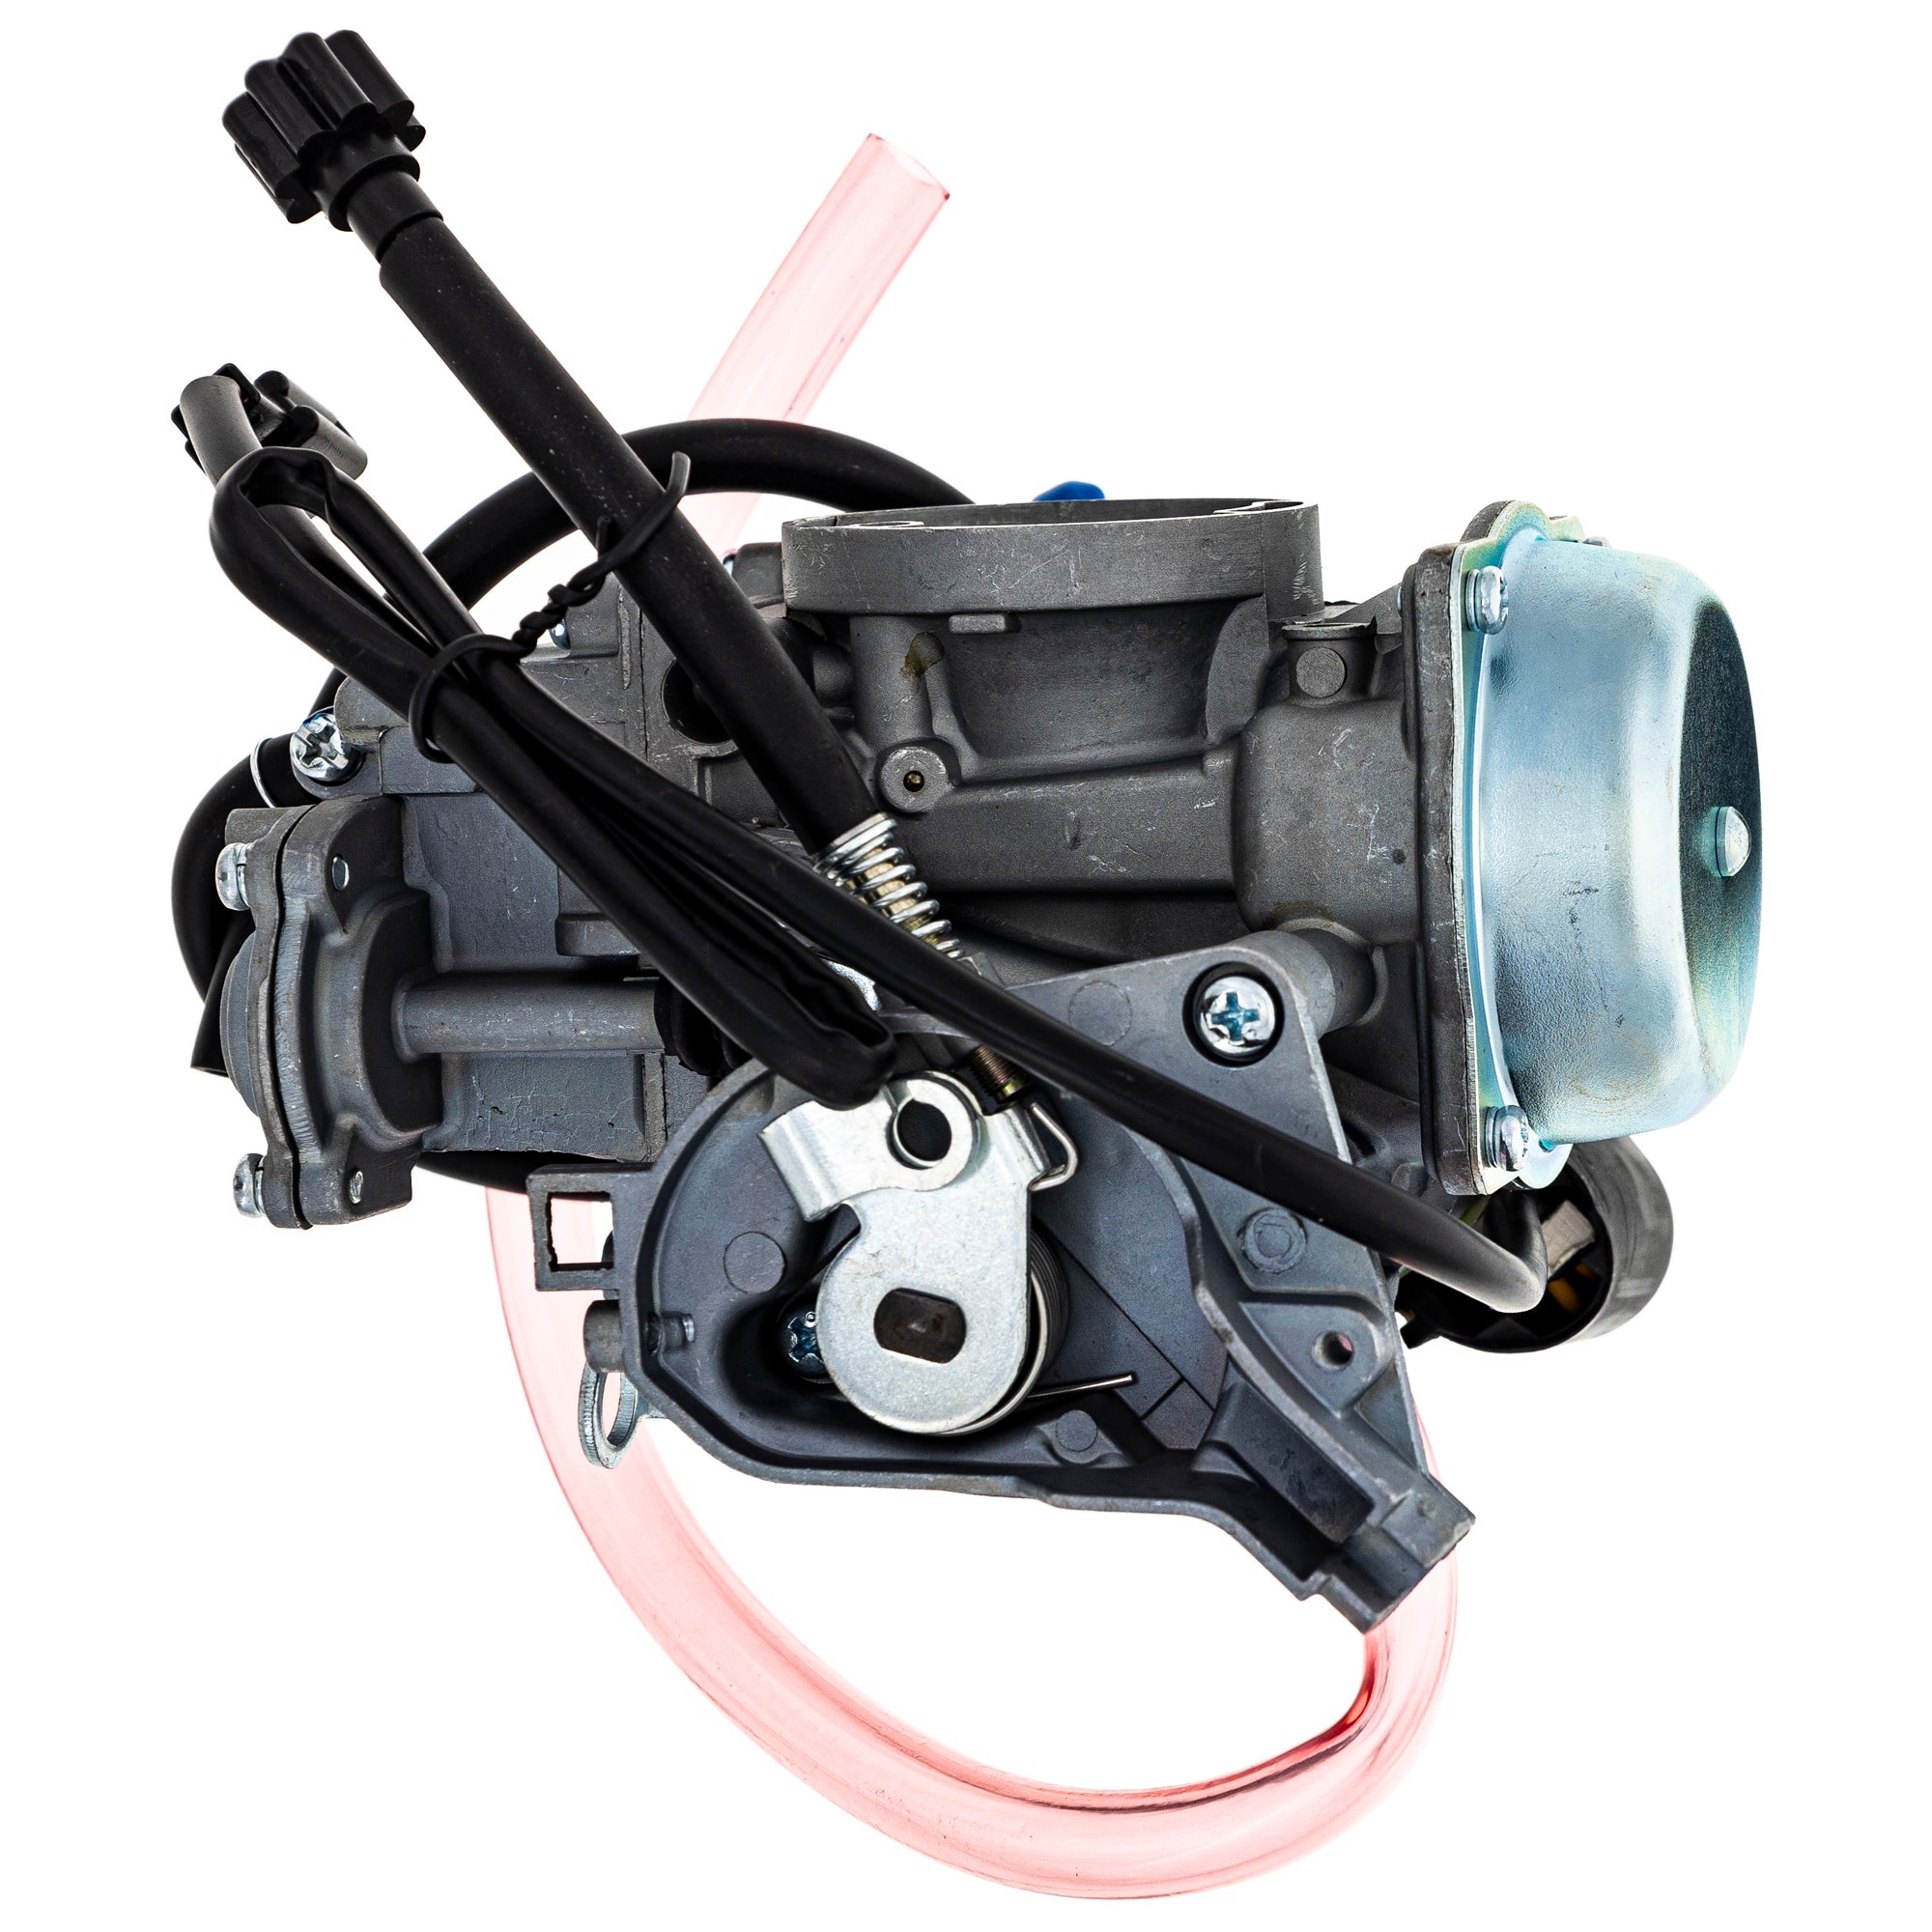 Carburetor Assembly for zOTHER Arctic Cat Textron Cat NICHE 519-KCR2212B